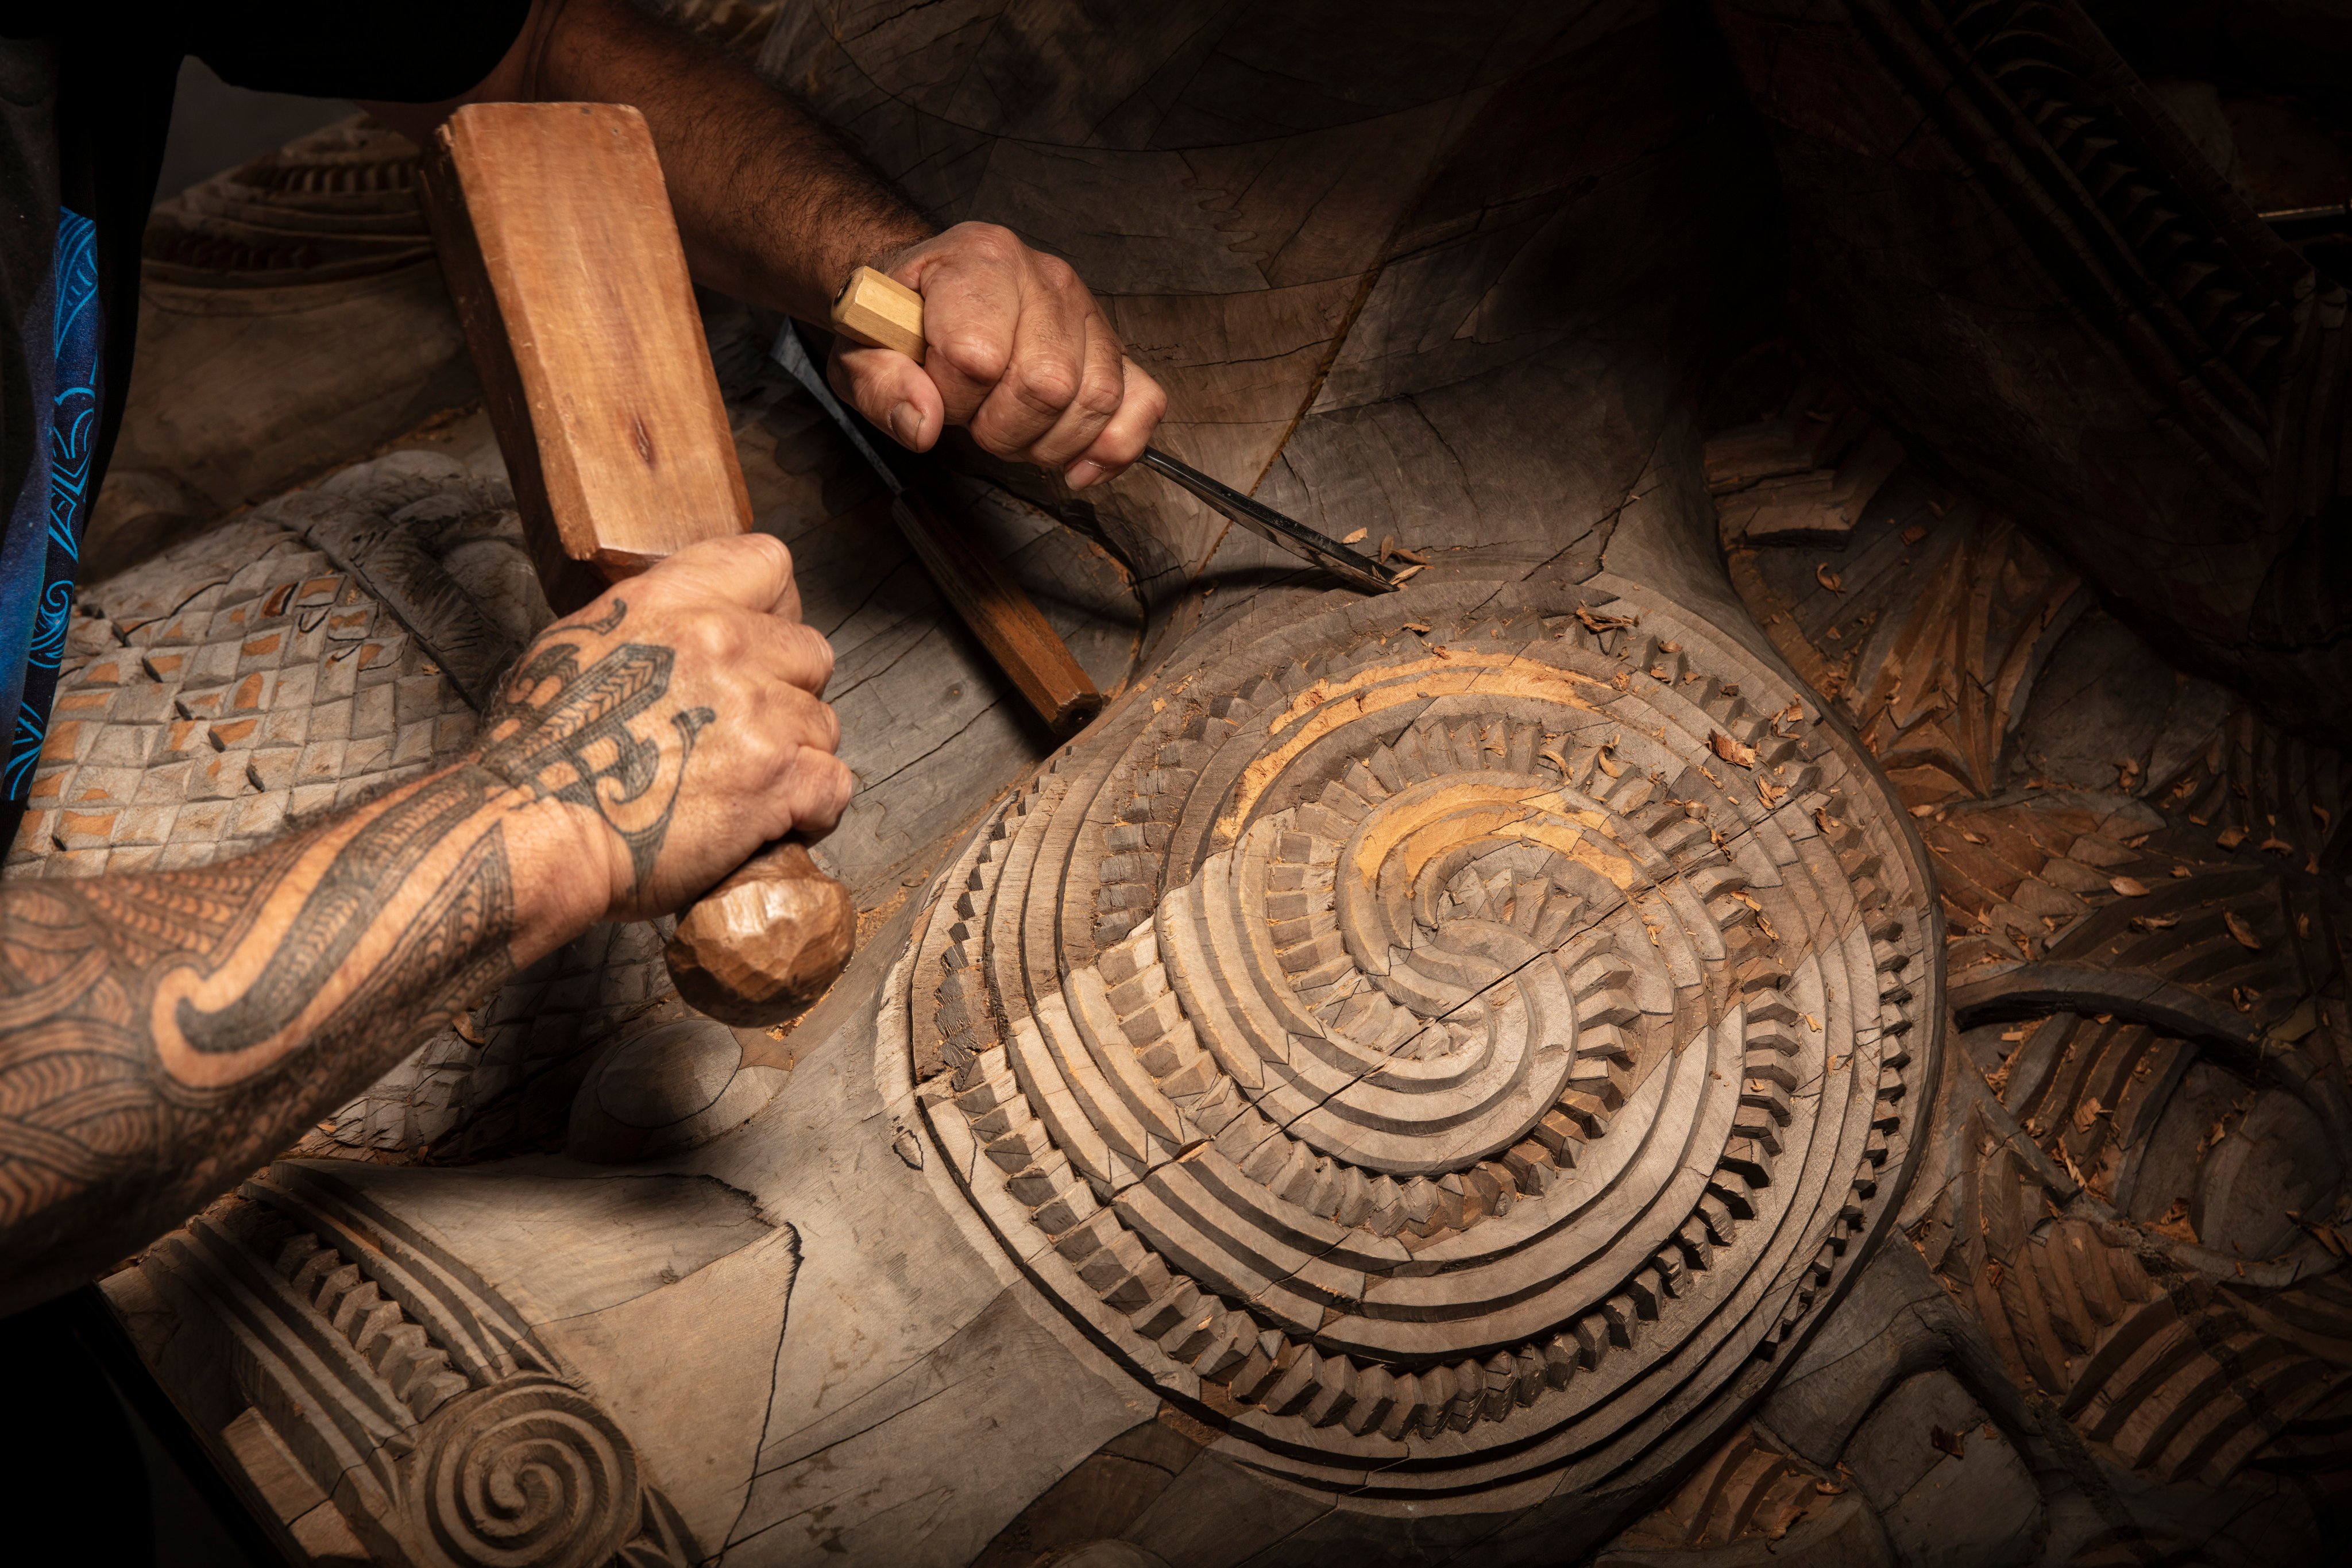 Woodcarvers have played a crucial role in the restoration of Maori meeting houses, which have in turn been pivotal in Maori revival. Critics of the government in New Zealand say it aims to undermine indigenous rights, leading to a gathering of thousands of Maoris on Saturday. File photo: SCMP

